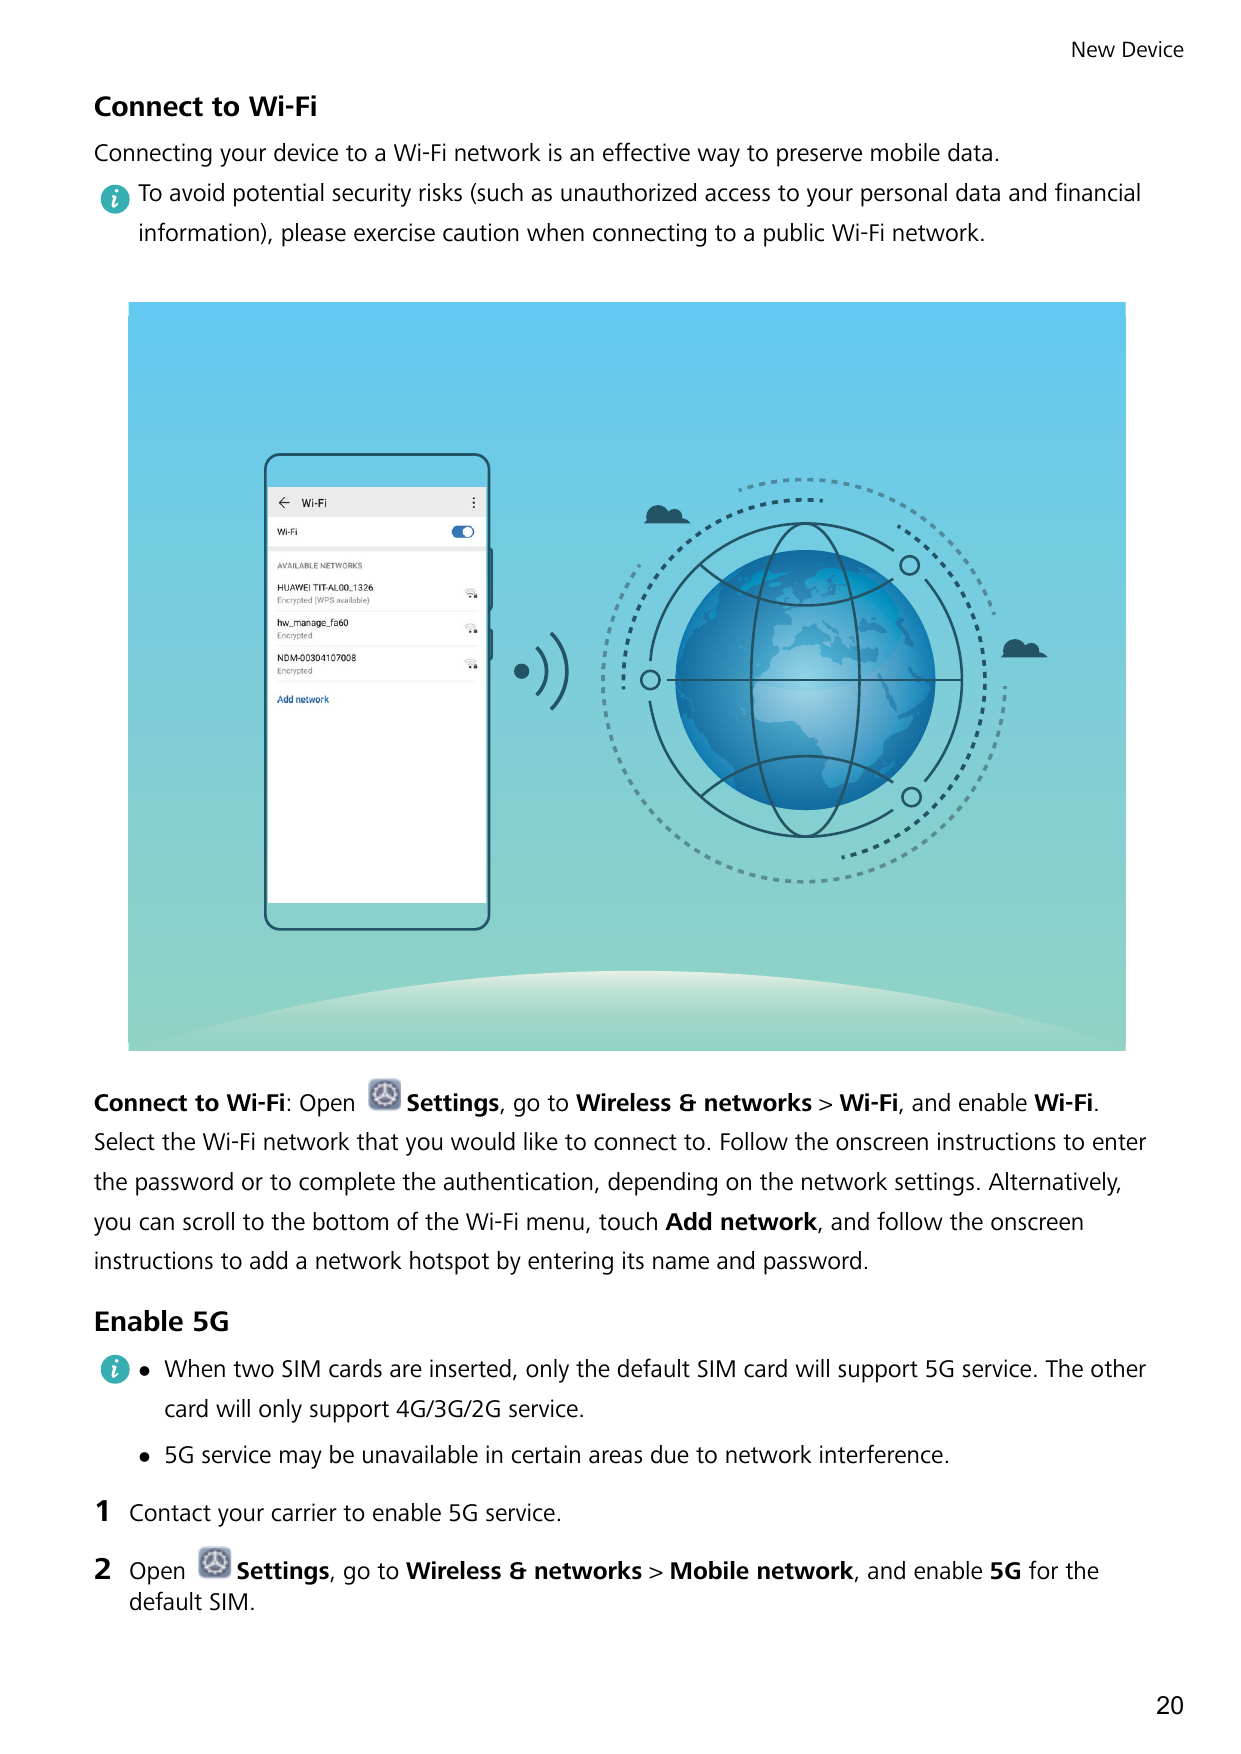 New DeviceConnect to Wi-FiConnecting your device to a Wi-Fi network is an effective way to preserve mobile data.To avoid potenti